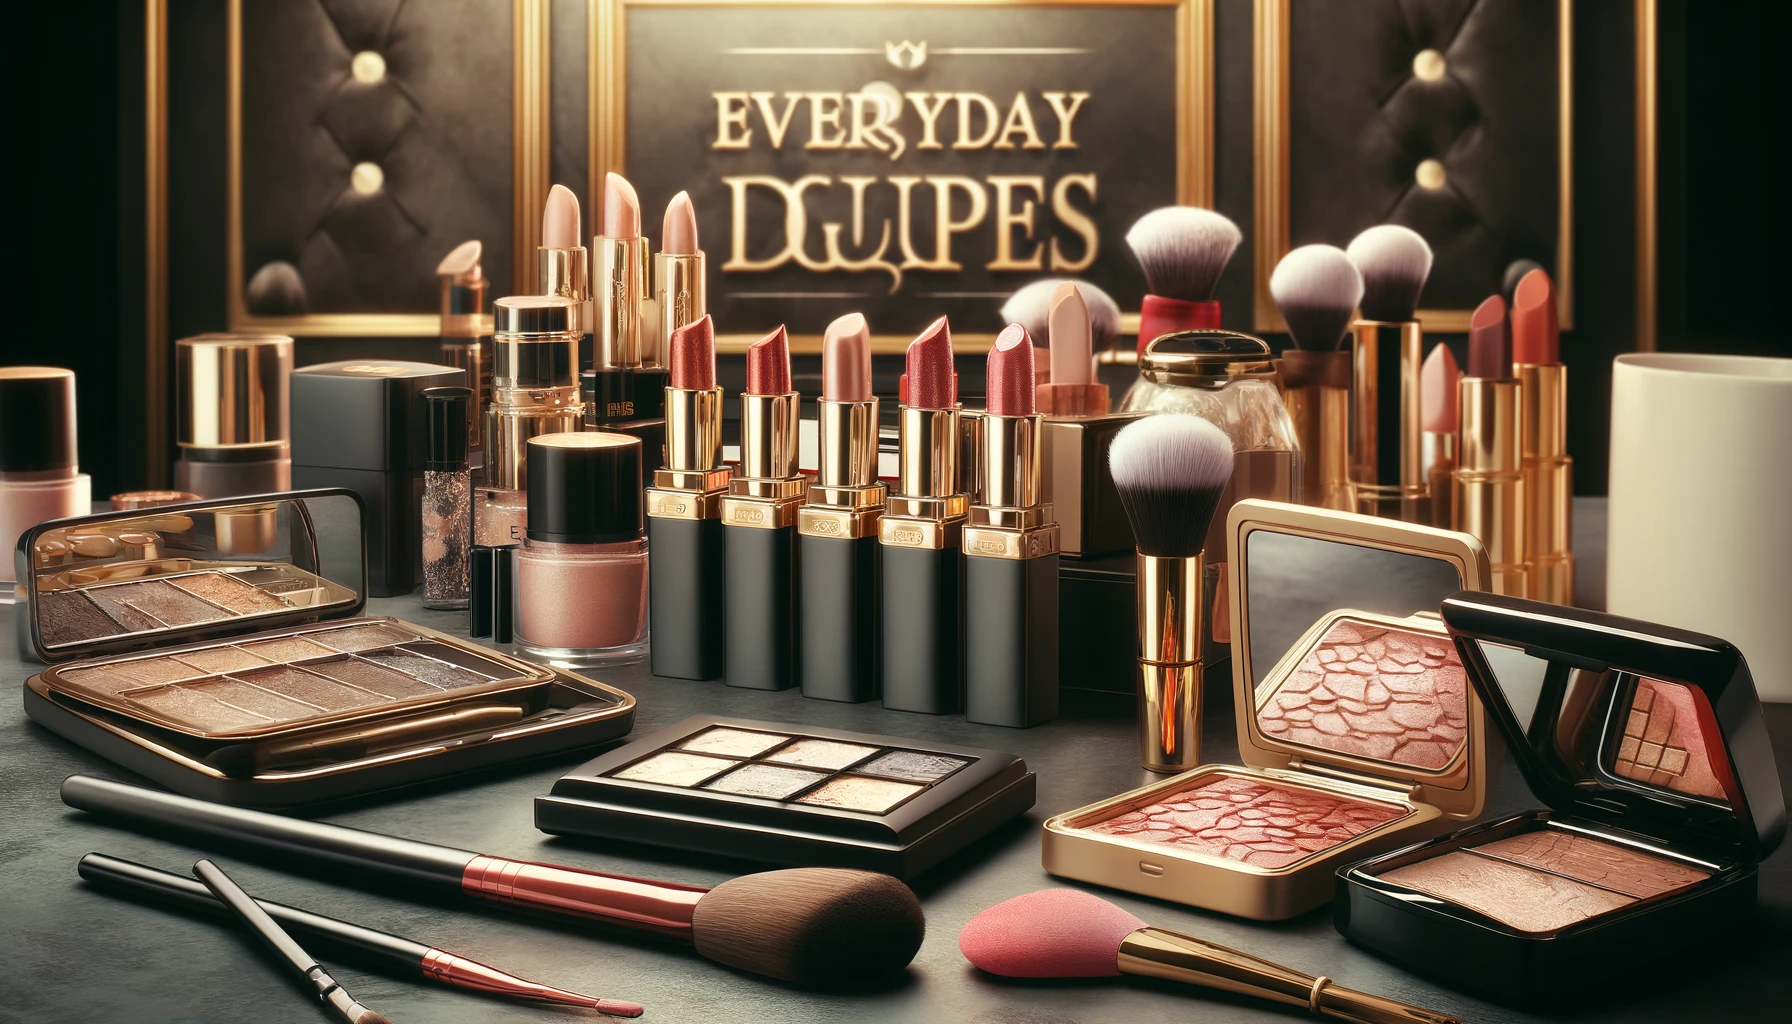 LUXURY MAKEUP DUPES FOR EVERYDAY GLAM